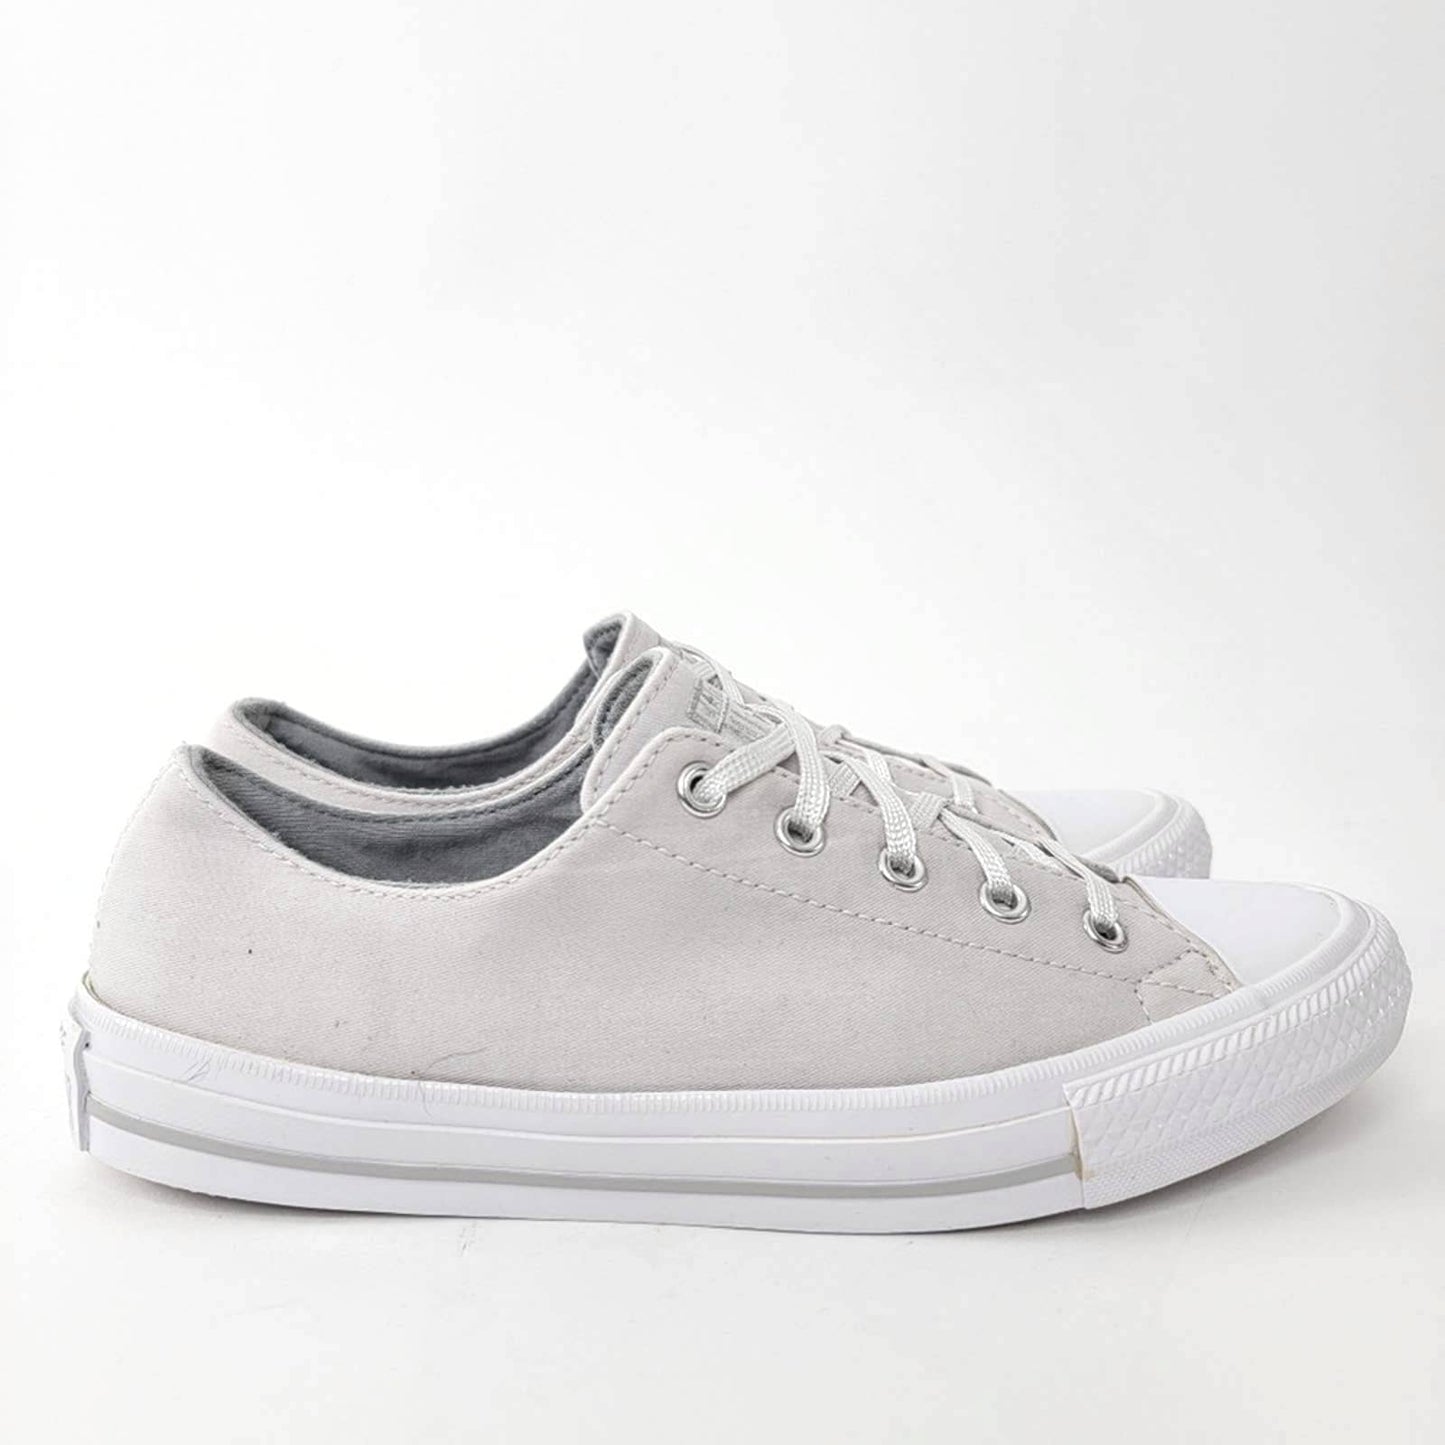 Converse Chuck Taylor All Star Gemma Low White Sneakers - 7.5